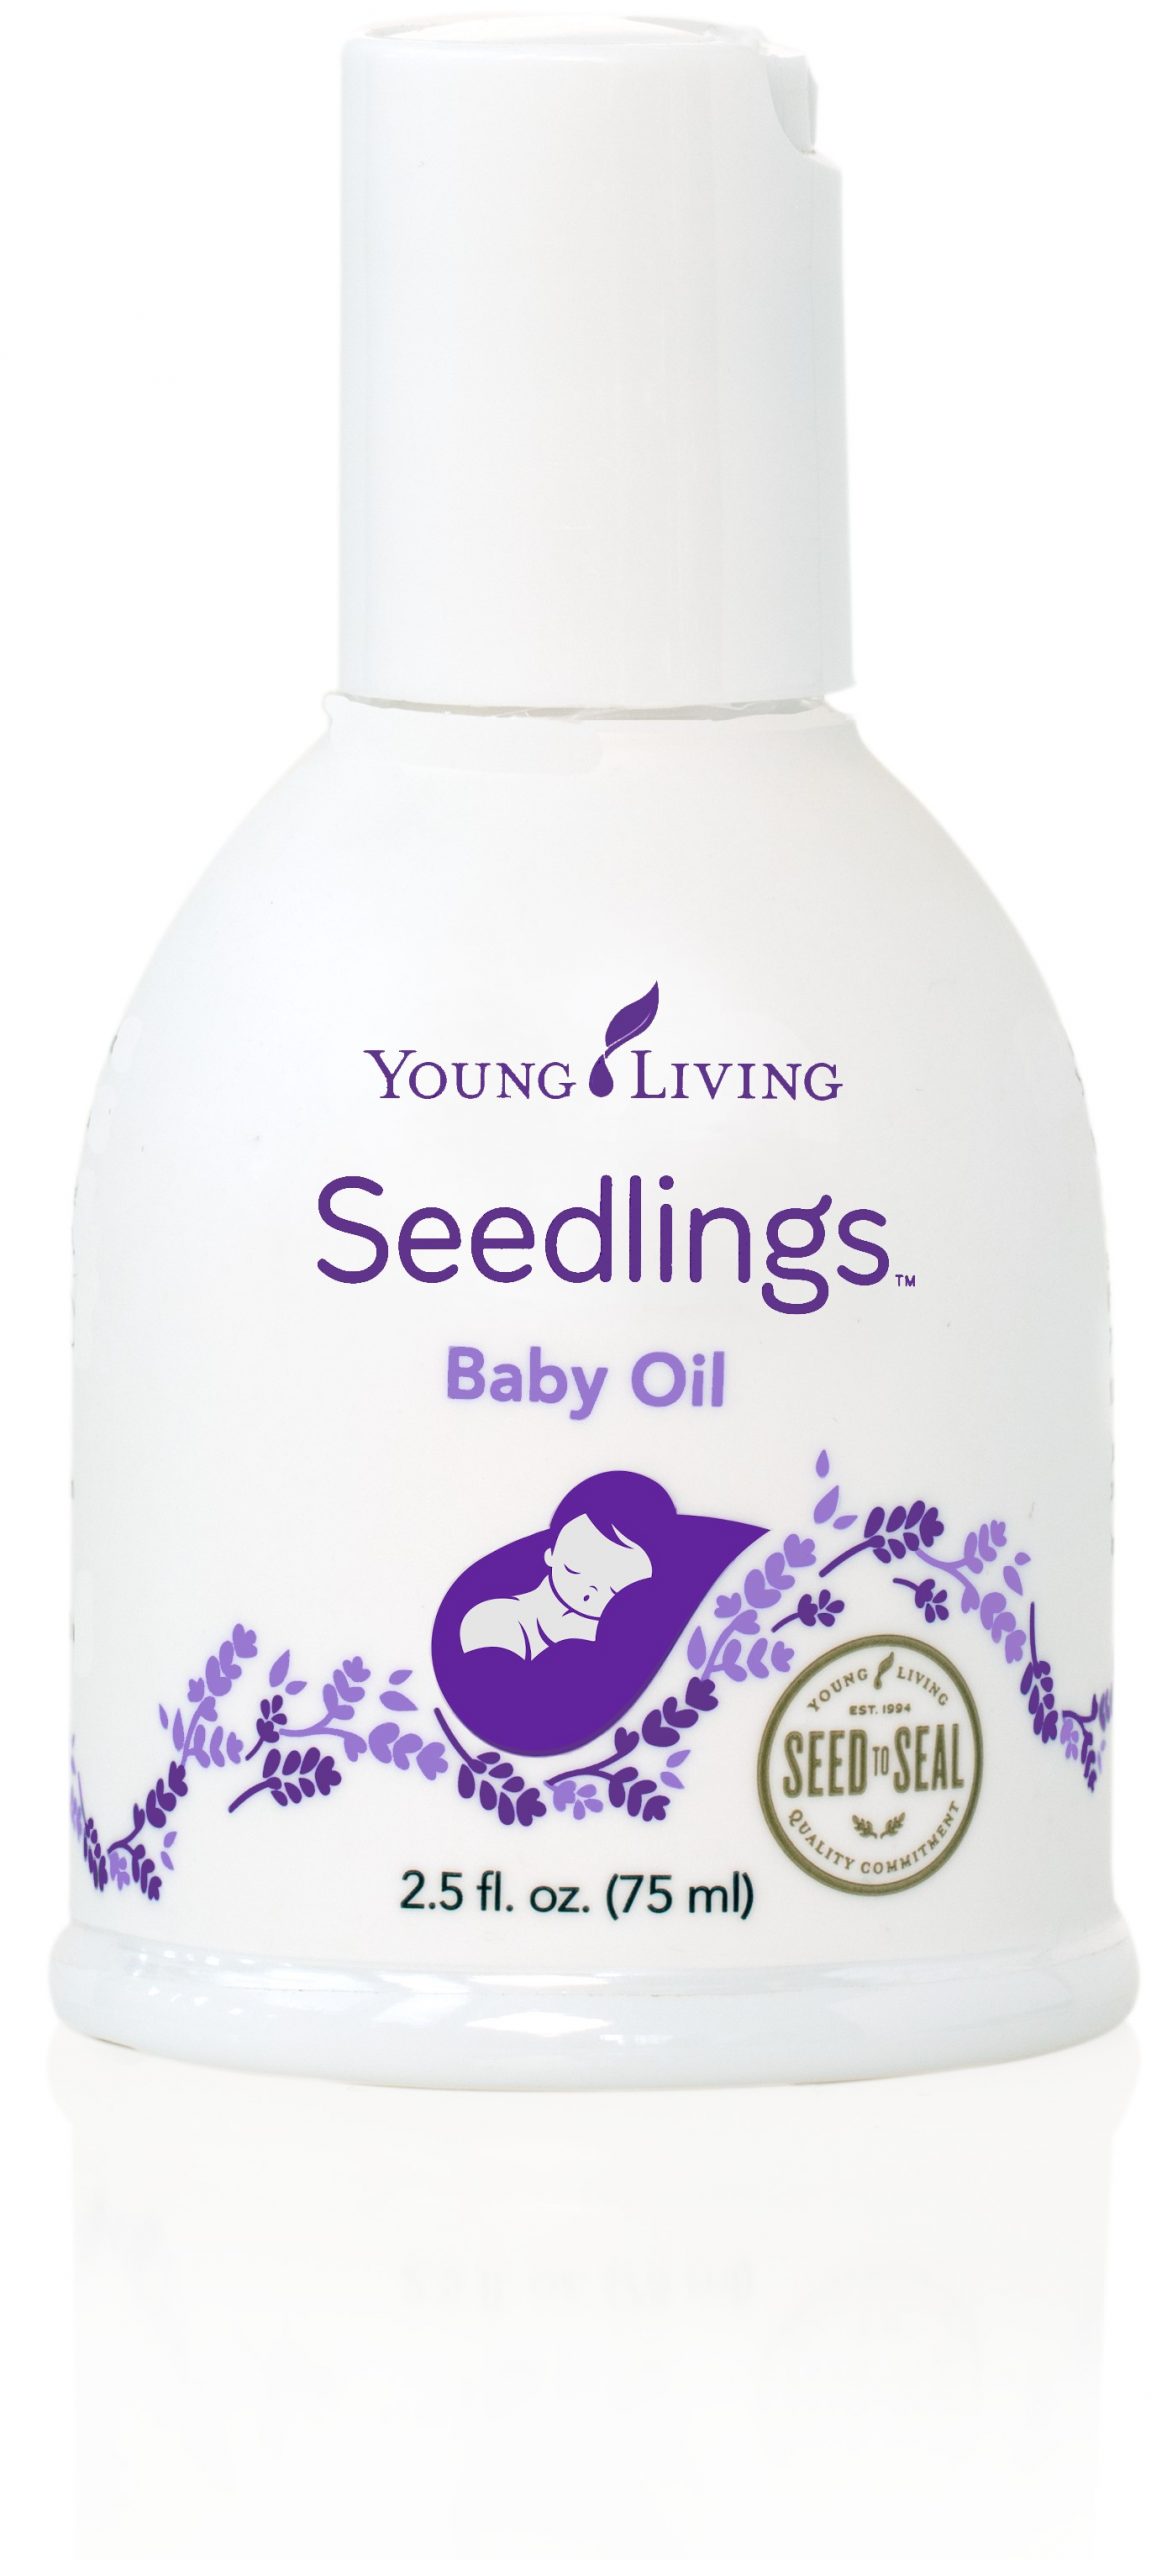 Seedlings Baby Oil - Young Living Essential Oils 